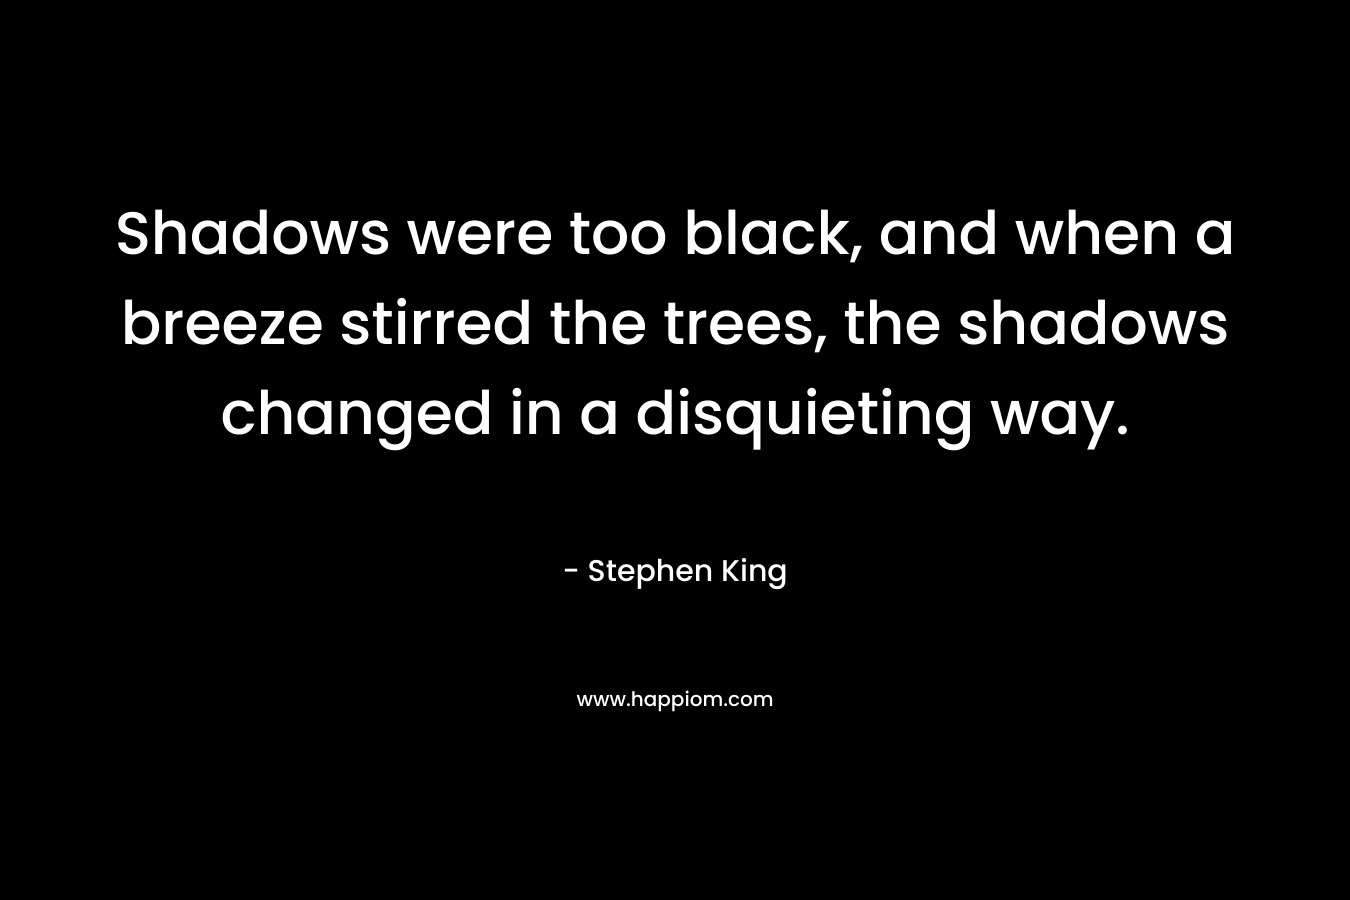 Shadows were too black, and when a breeze stirred the trees, the shadows changed in a disquieting way.